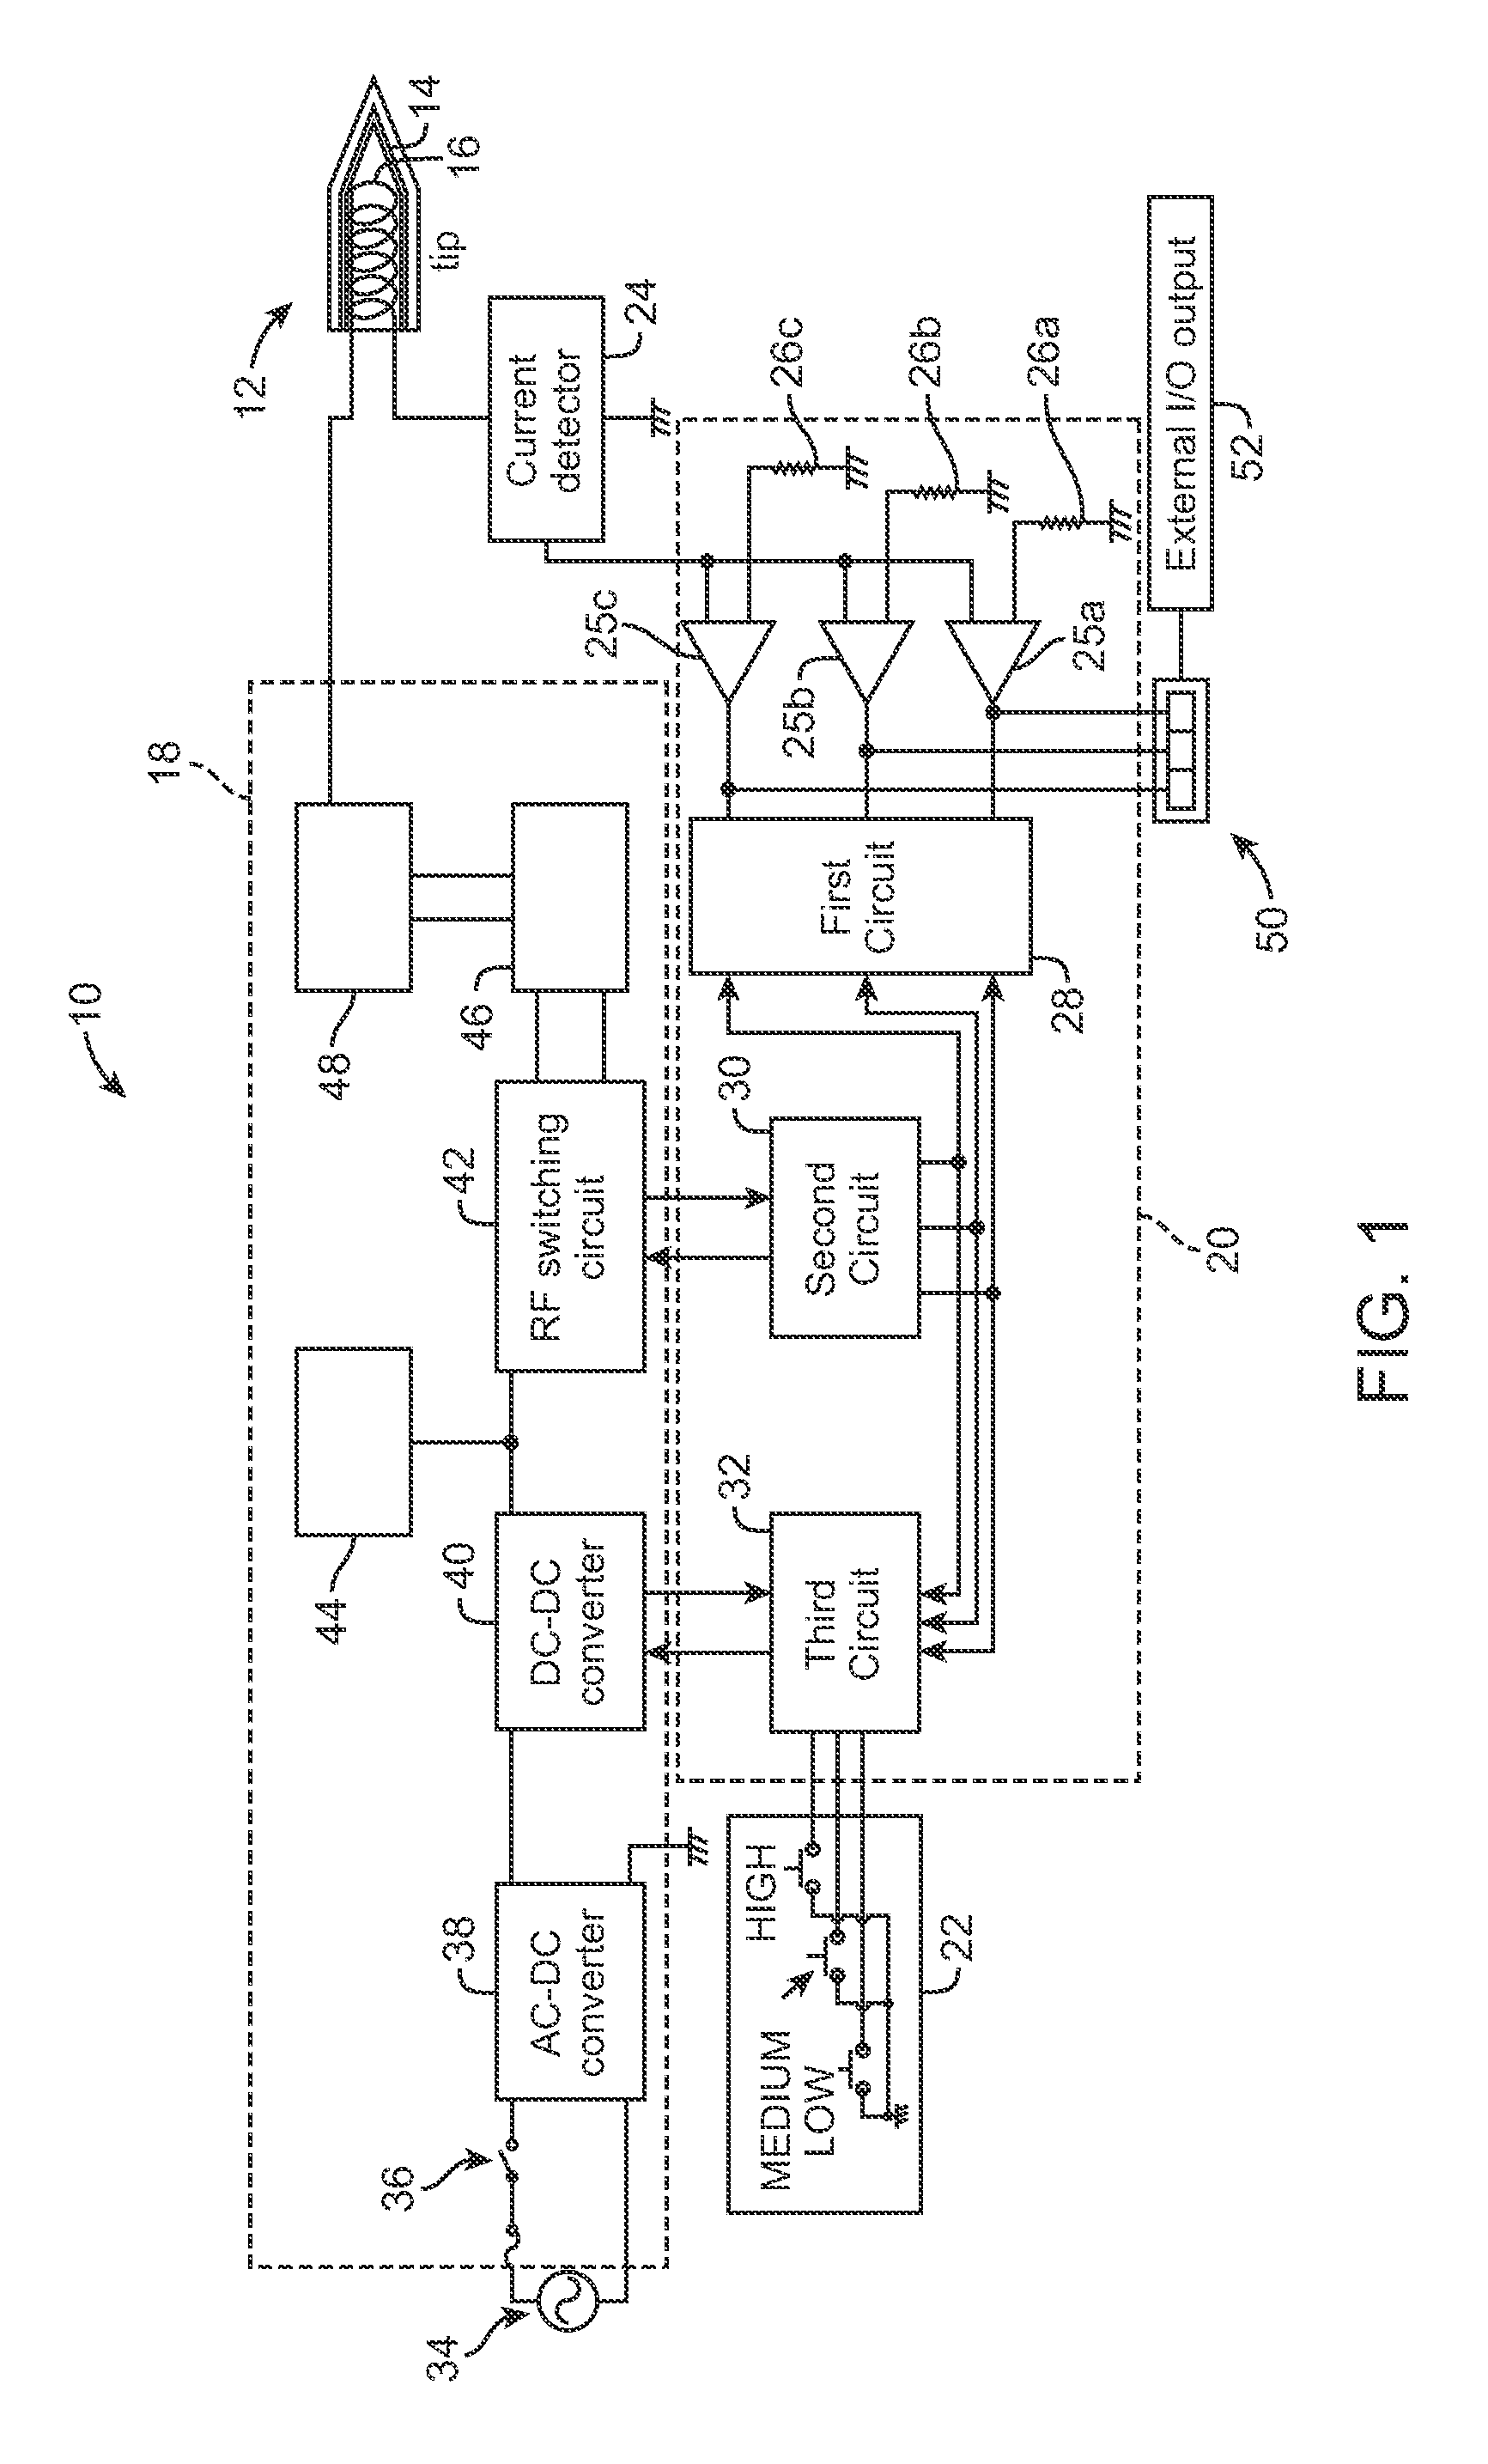 System and Method for Induction Heating of a Soldering Iron